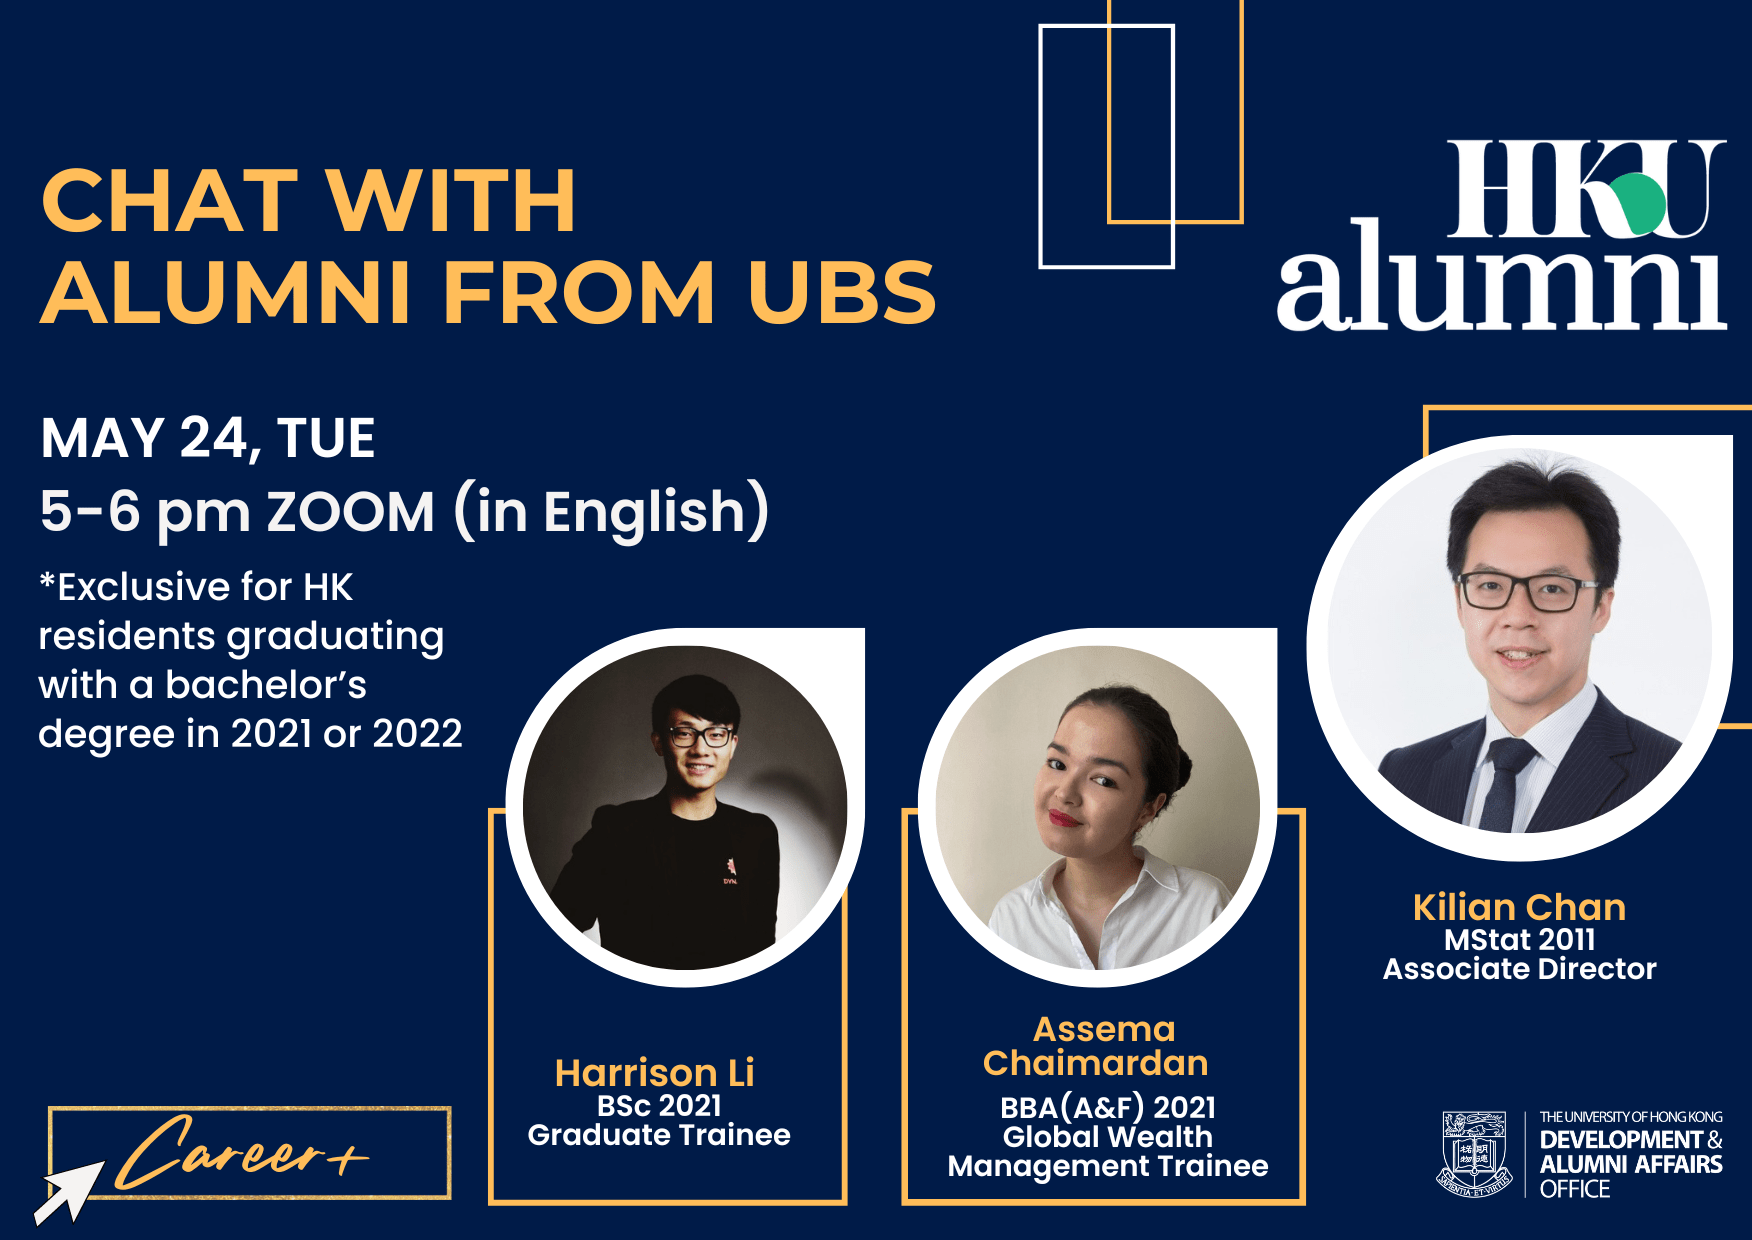 [Career+] Chat with Alumni from UBS